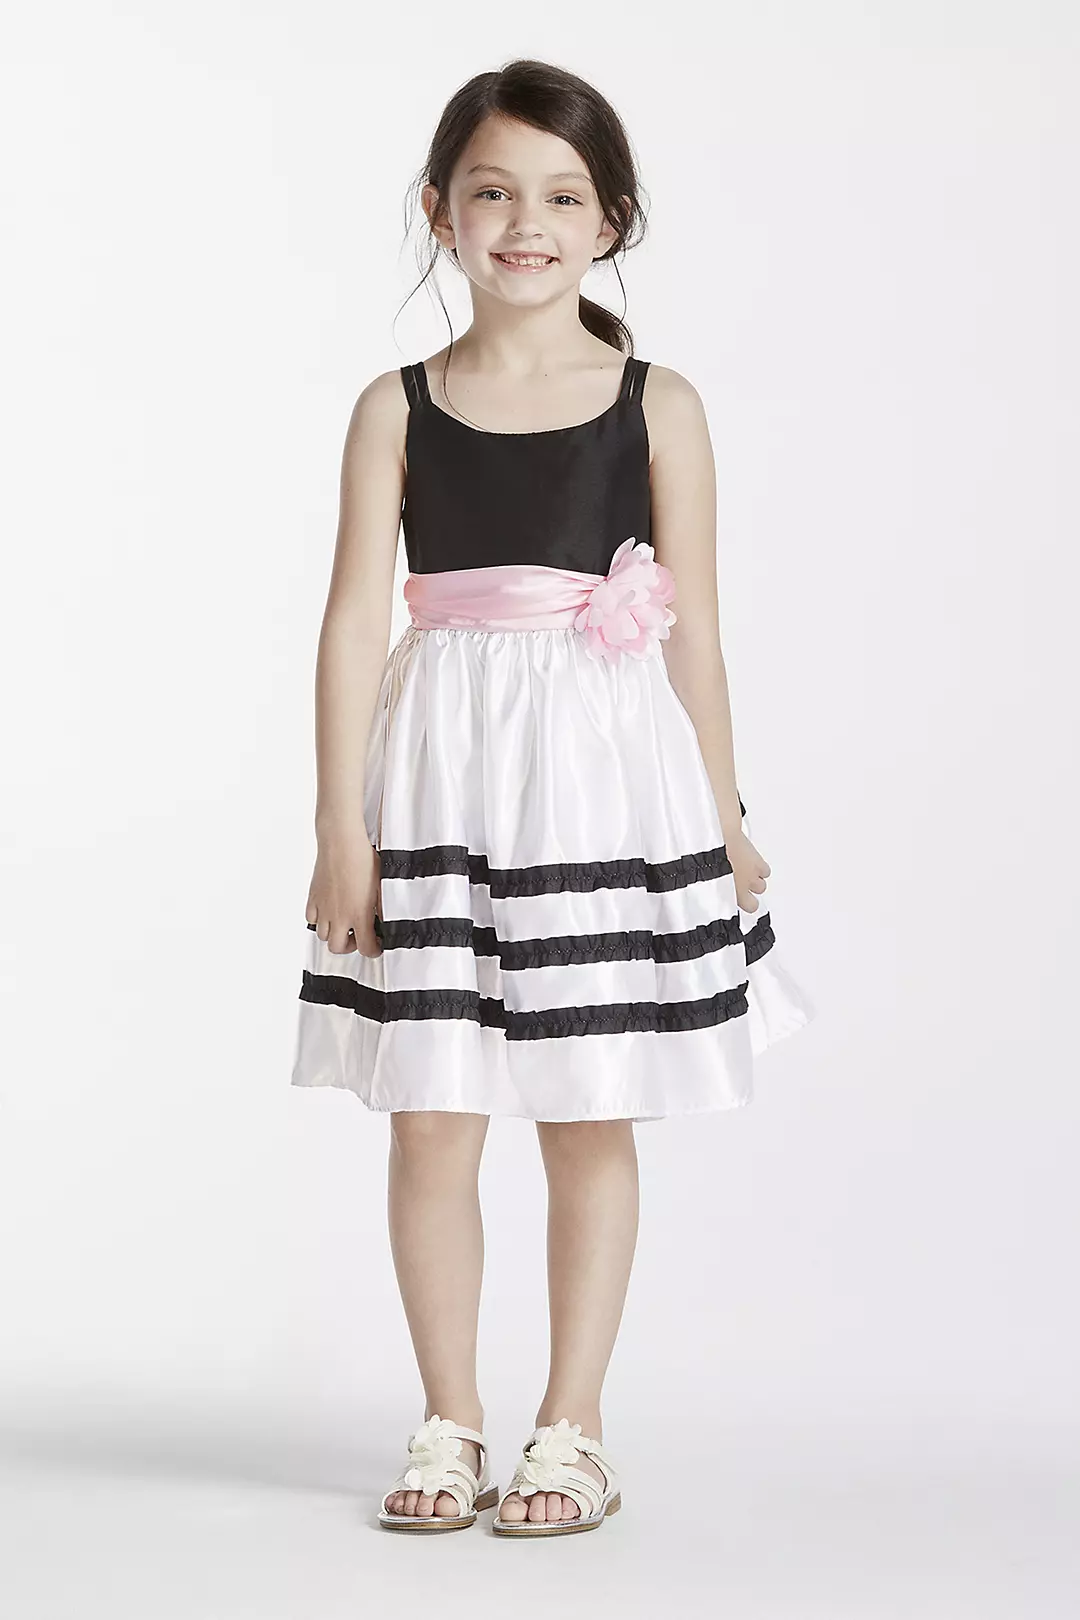 Black and White Striped Gown with Sash Image